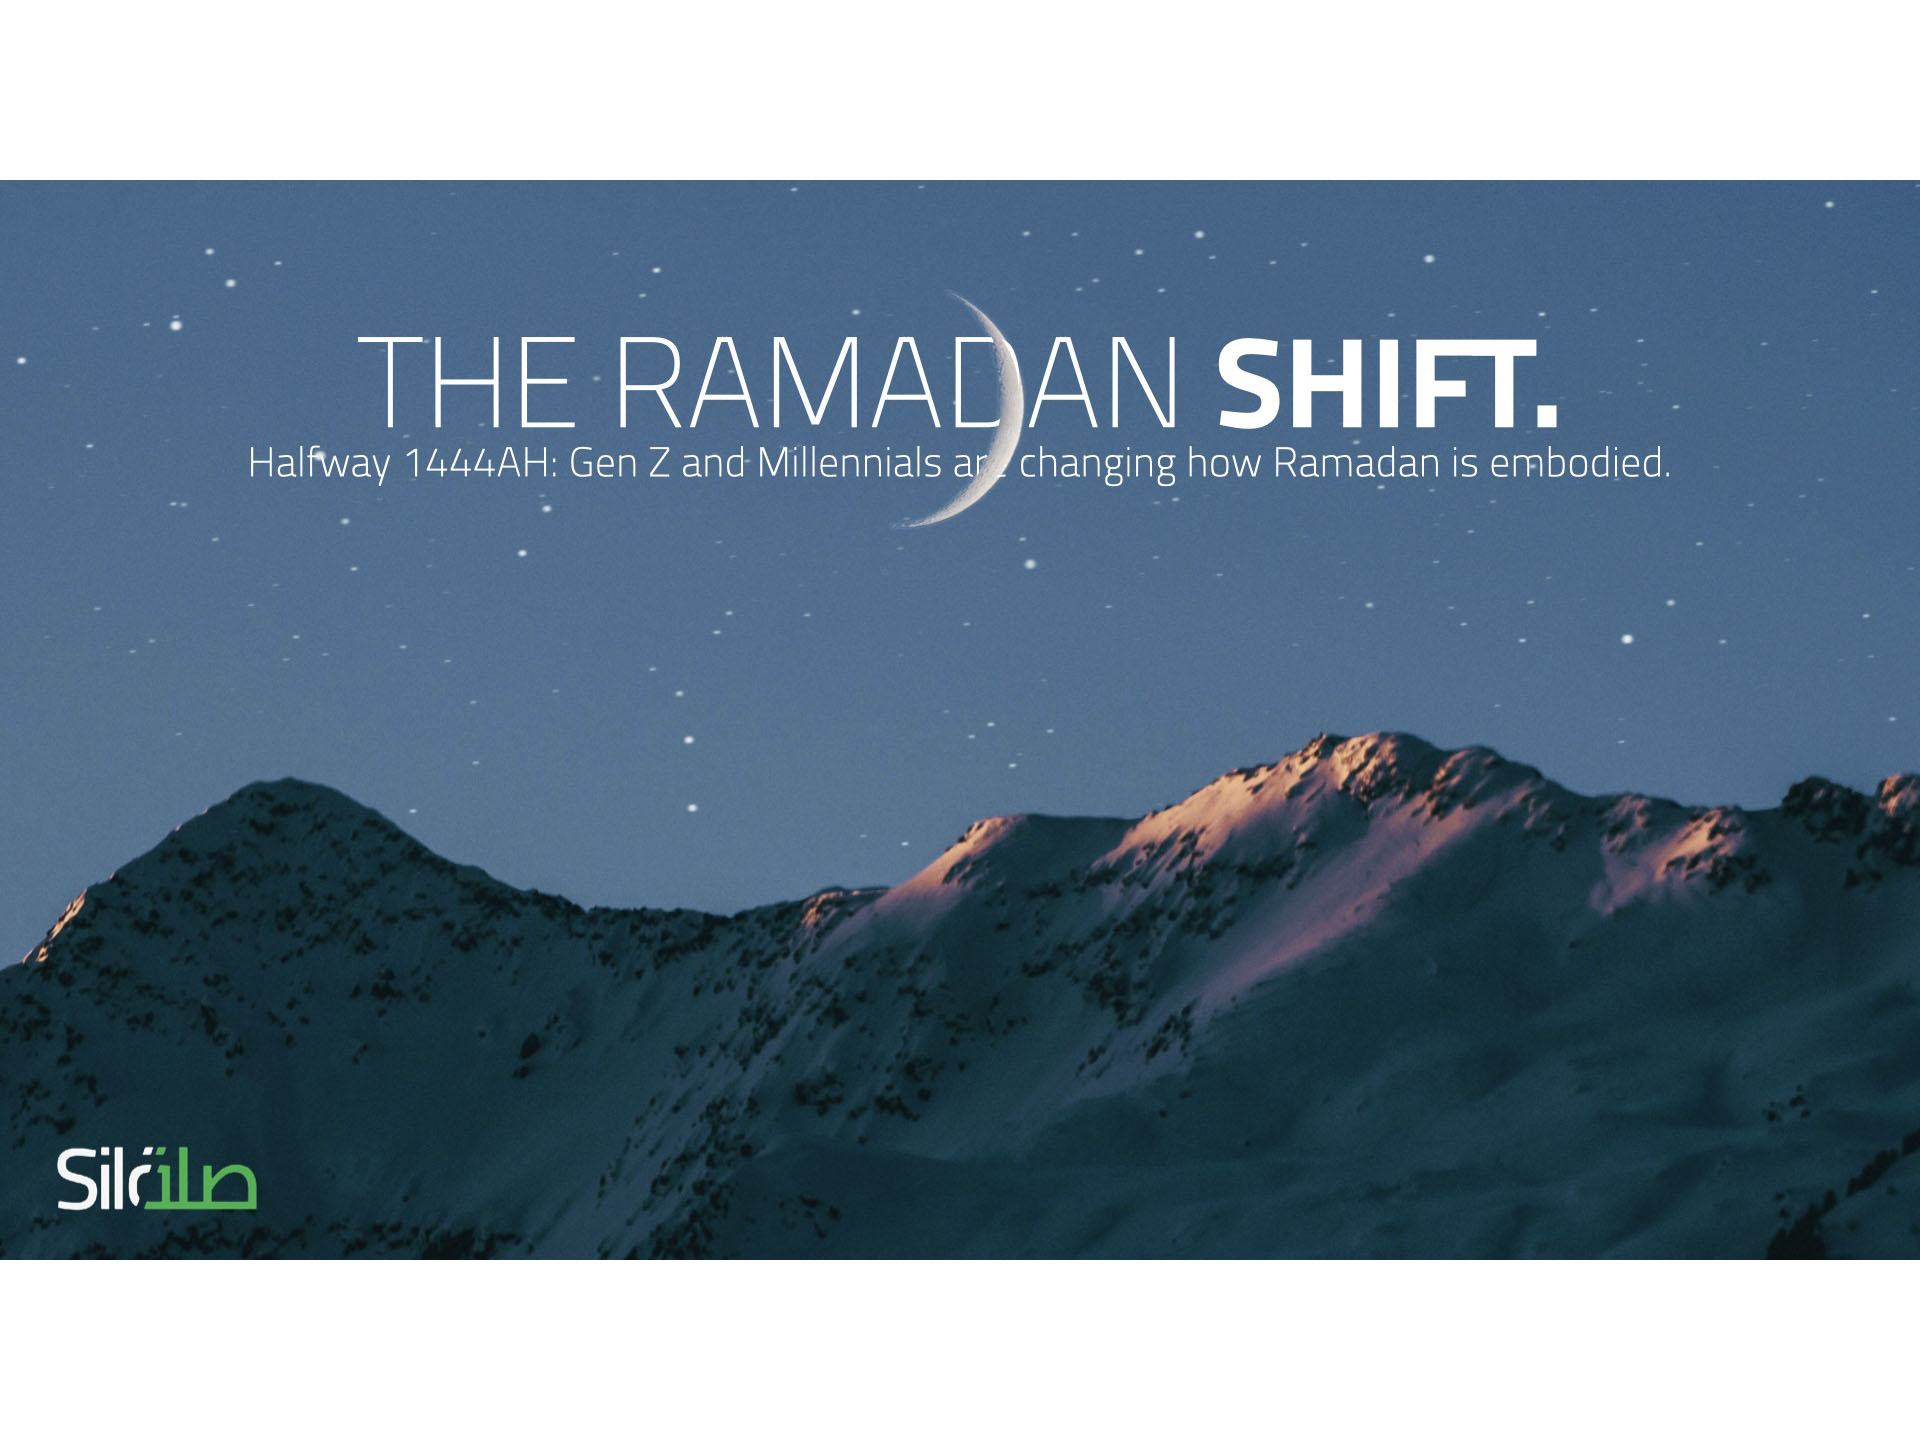 New research by Sila Insights examines the changing lifestyle priorities of Gen Z and millennials during Ramadan